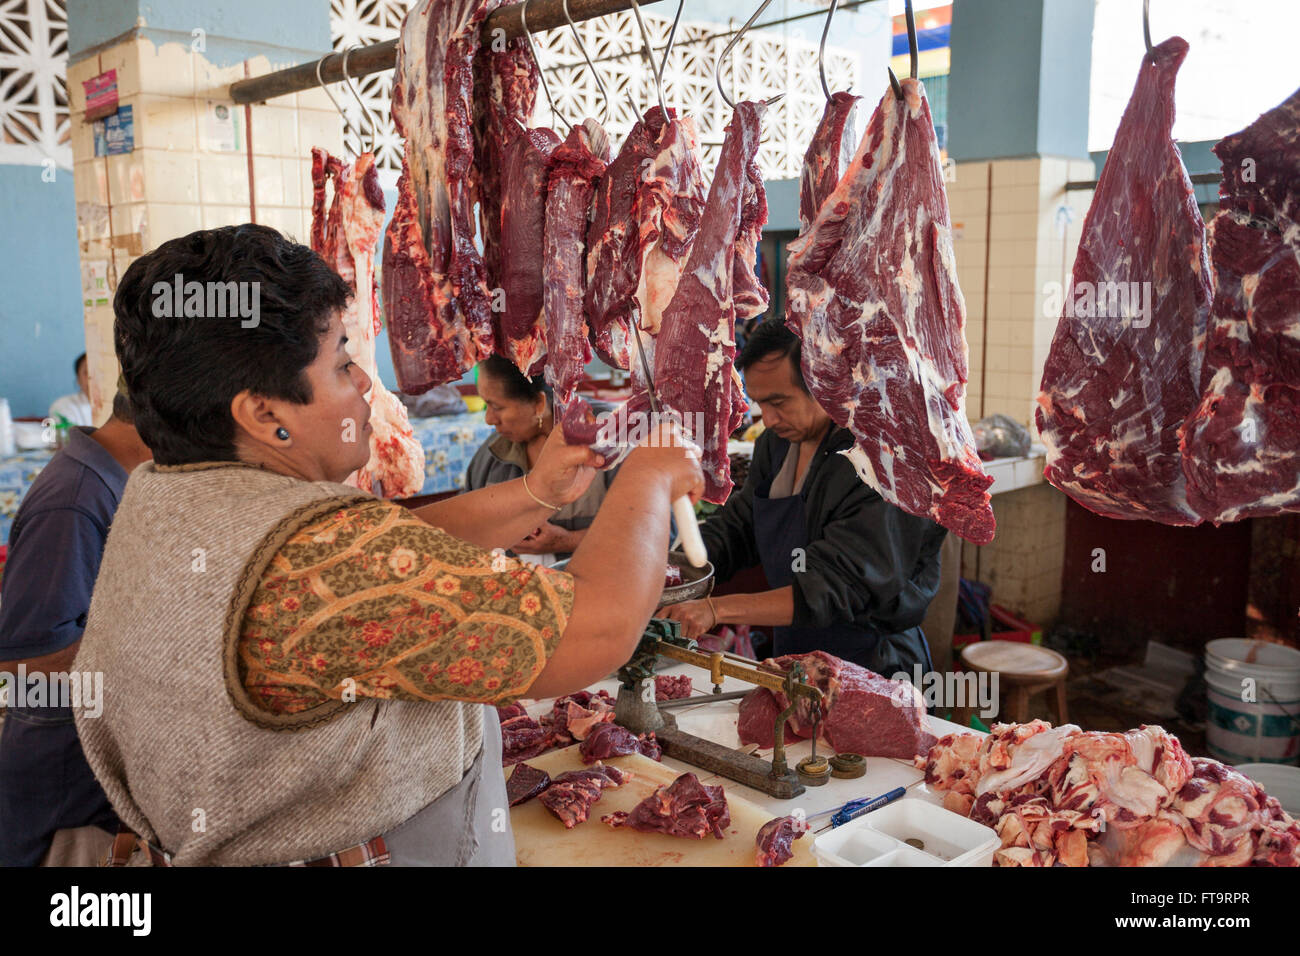 Making stewing beef in the market. A woman butcher slices a strip of beef from a large hanging piece of beef. Stock Photo